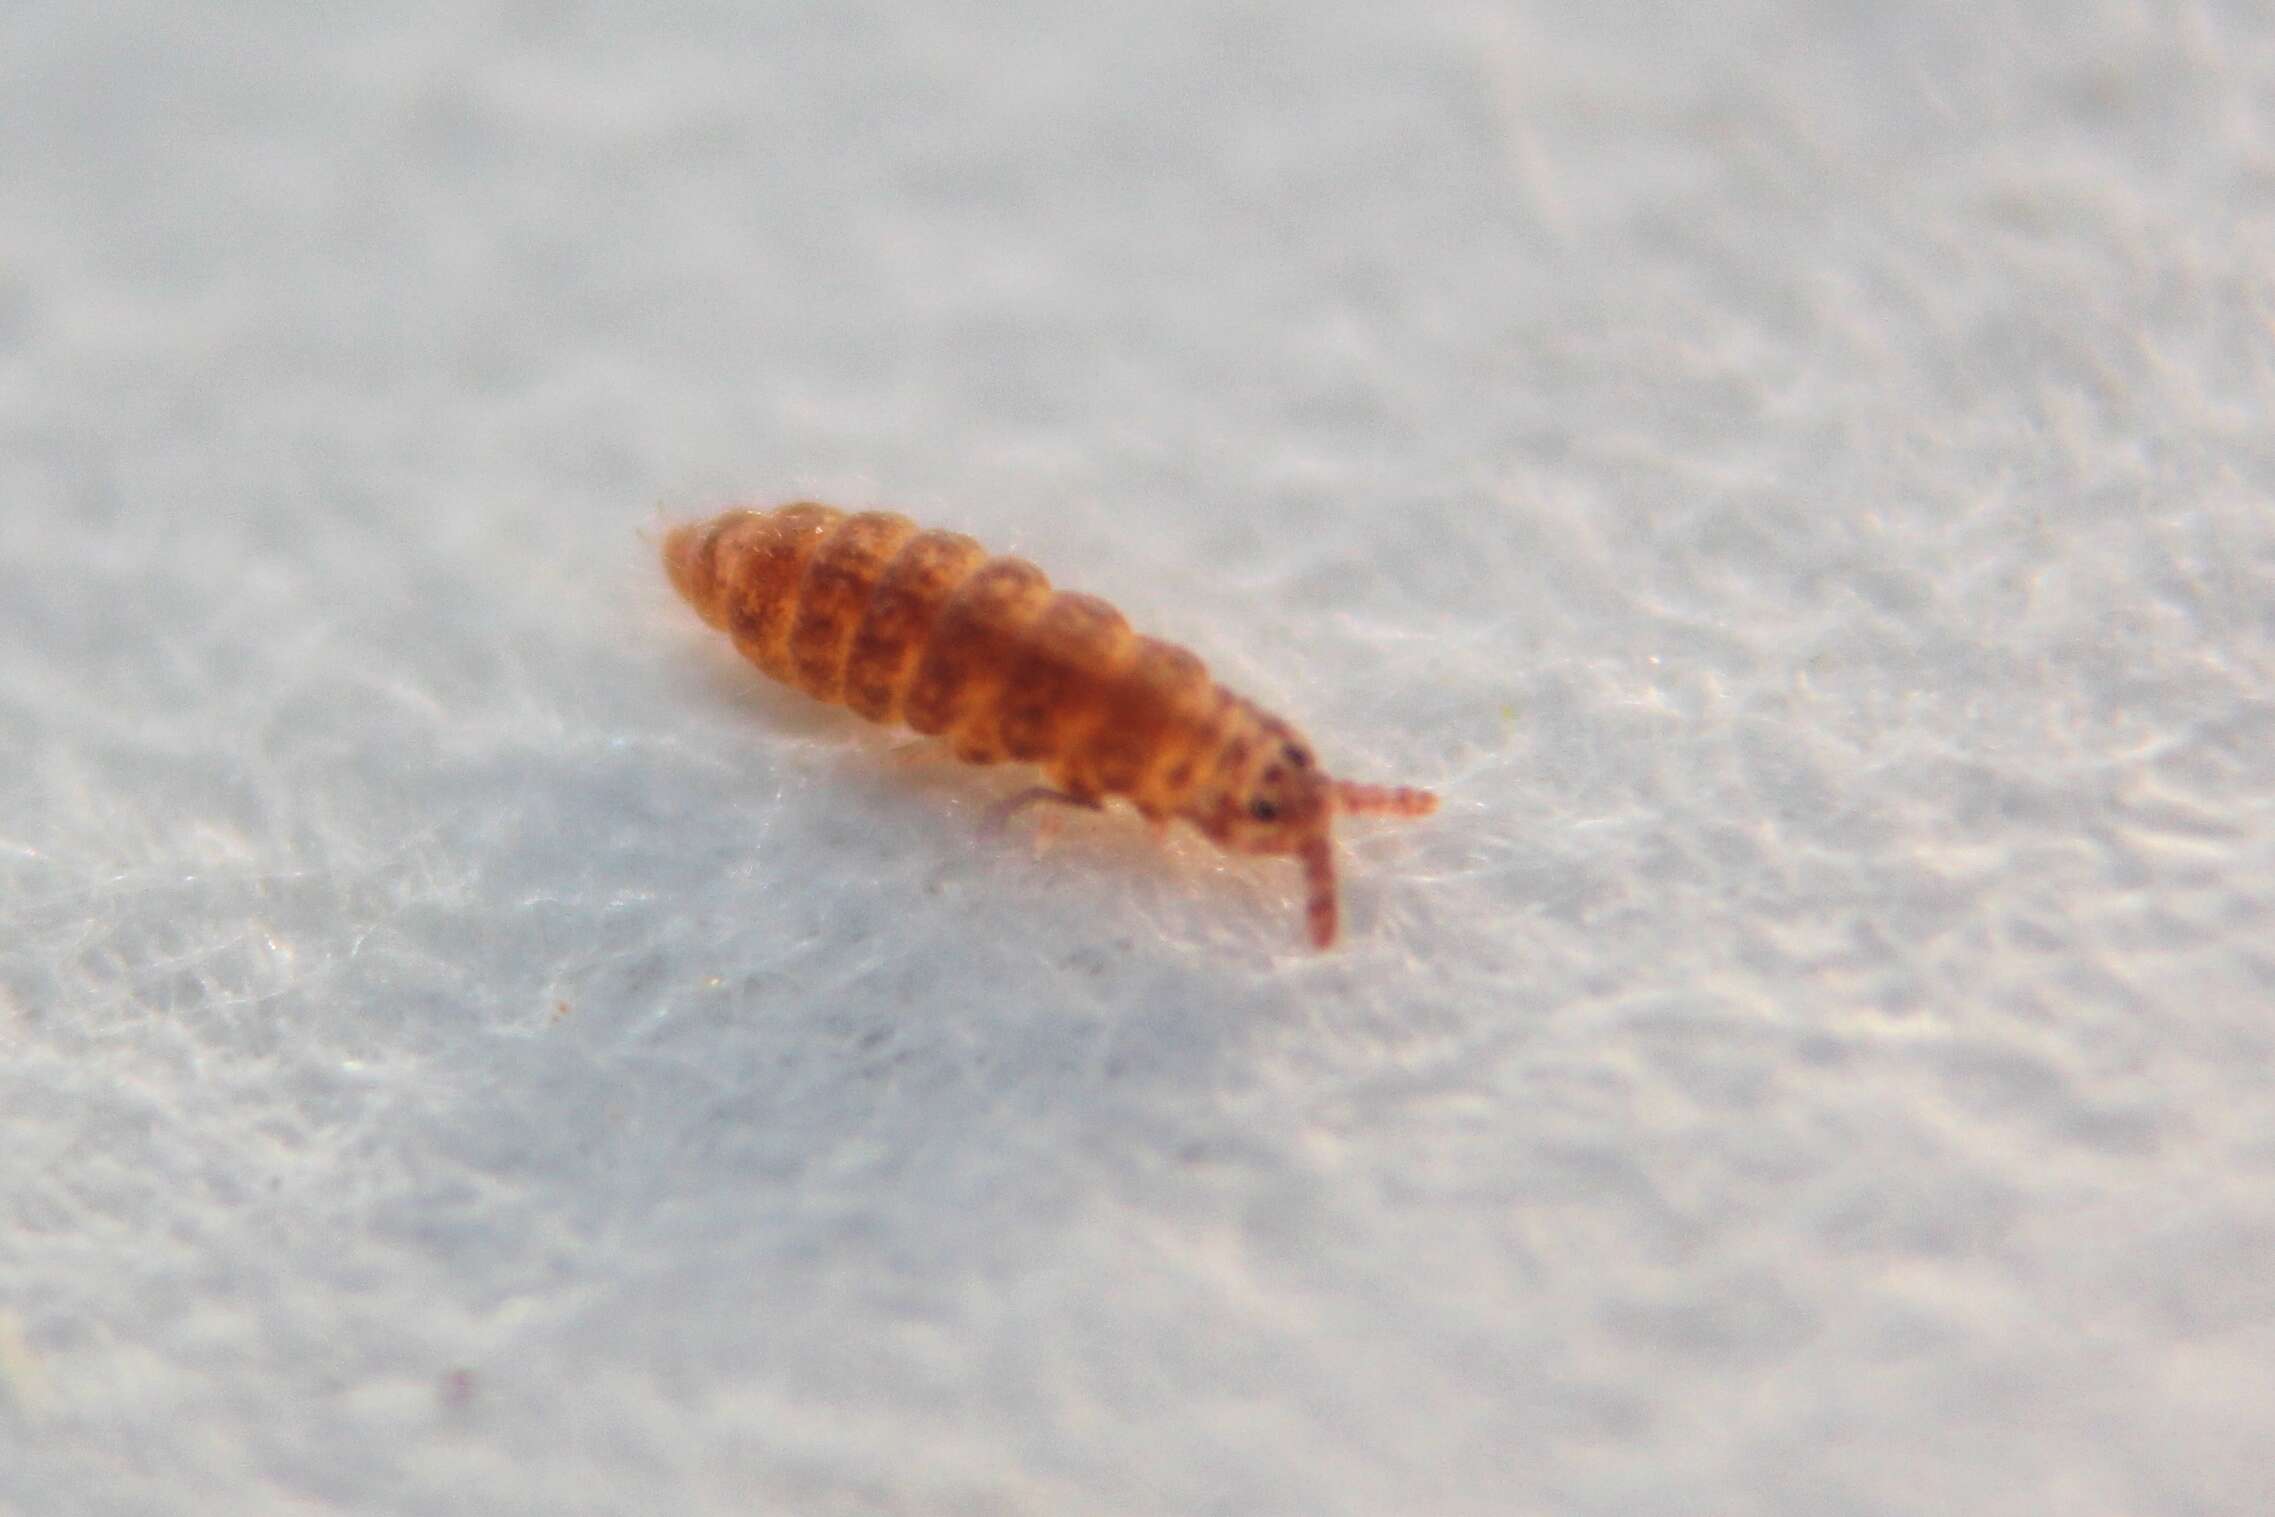 Image of elongate-bodied springtails